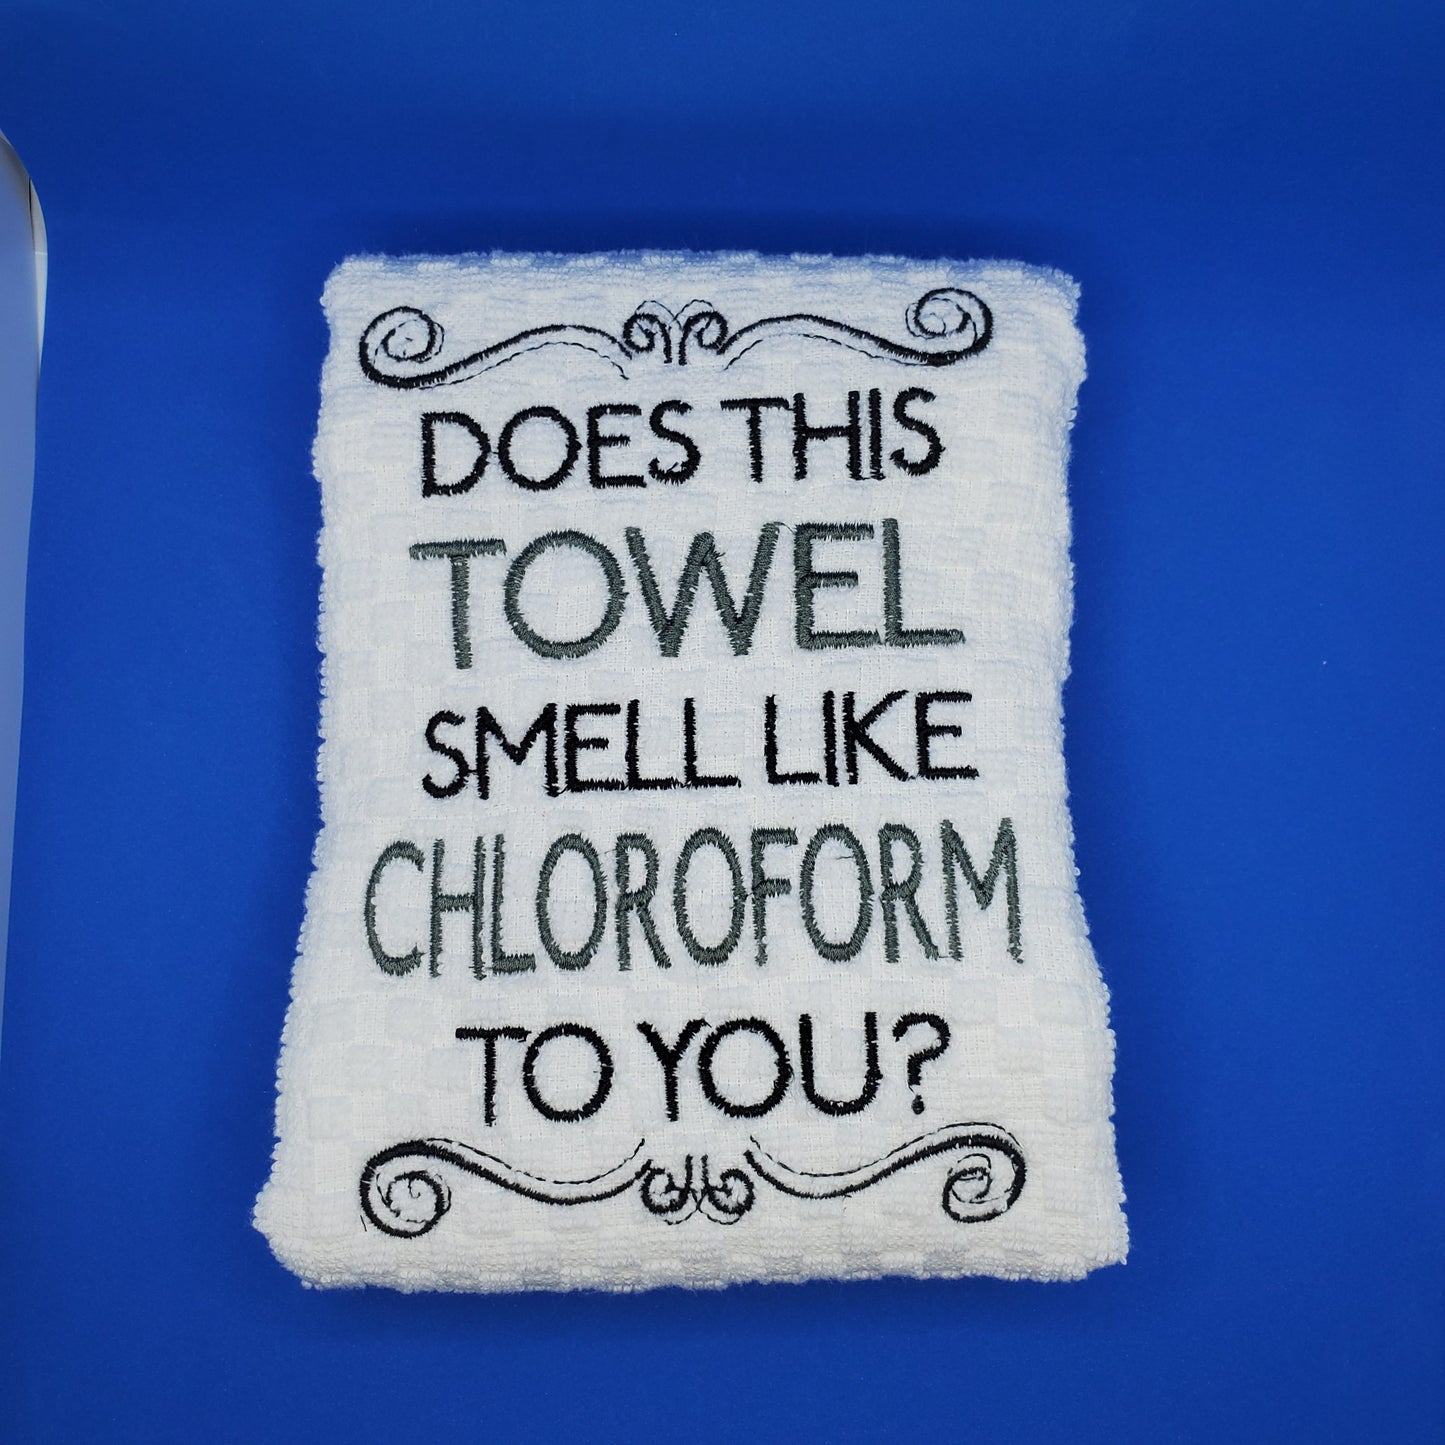 Does this Towel Smell Like Chloroform